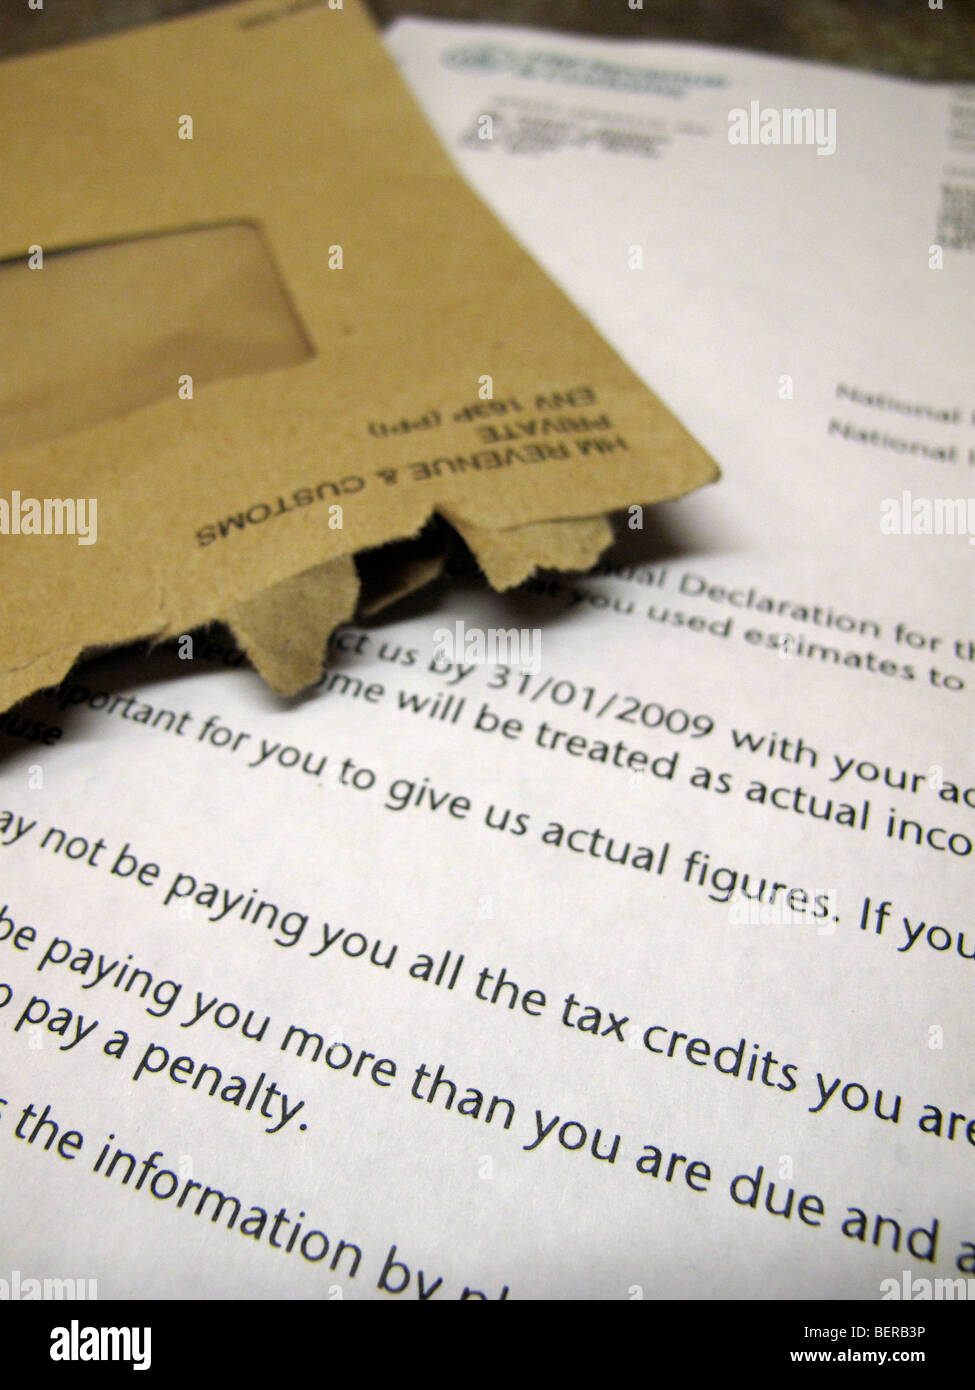 A letter from the tax credit's office. Stock Photo